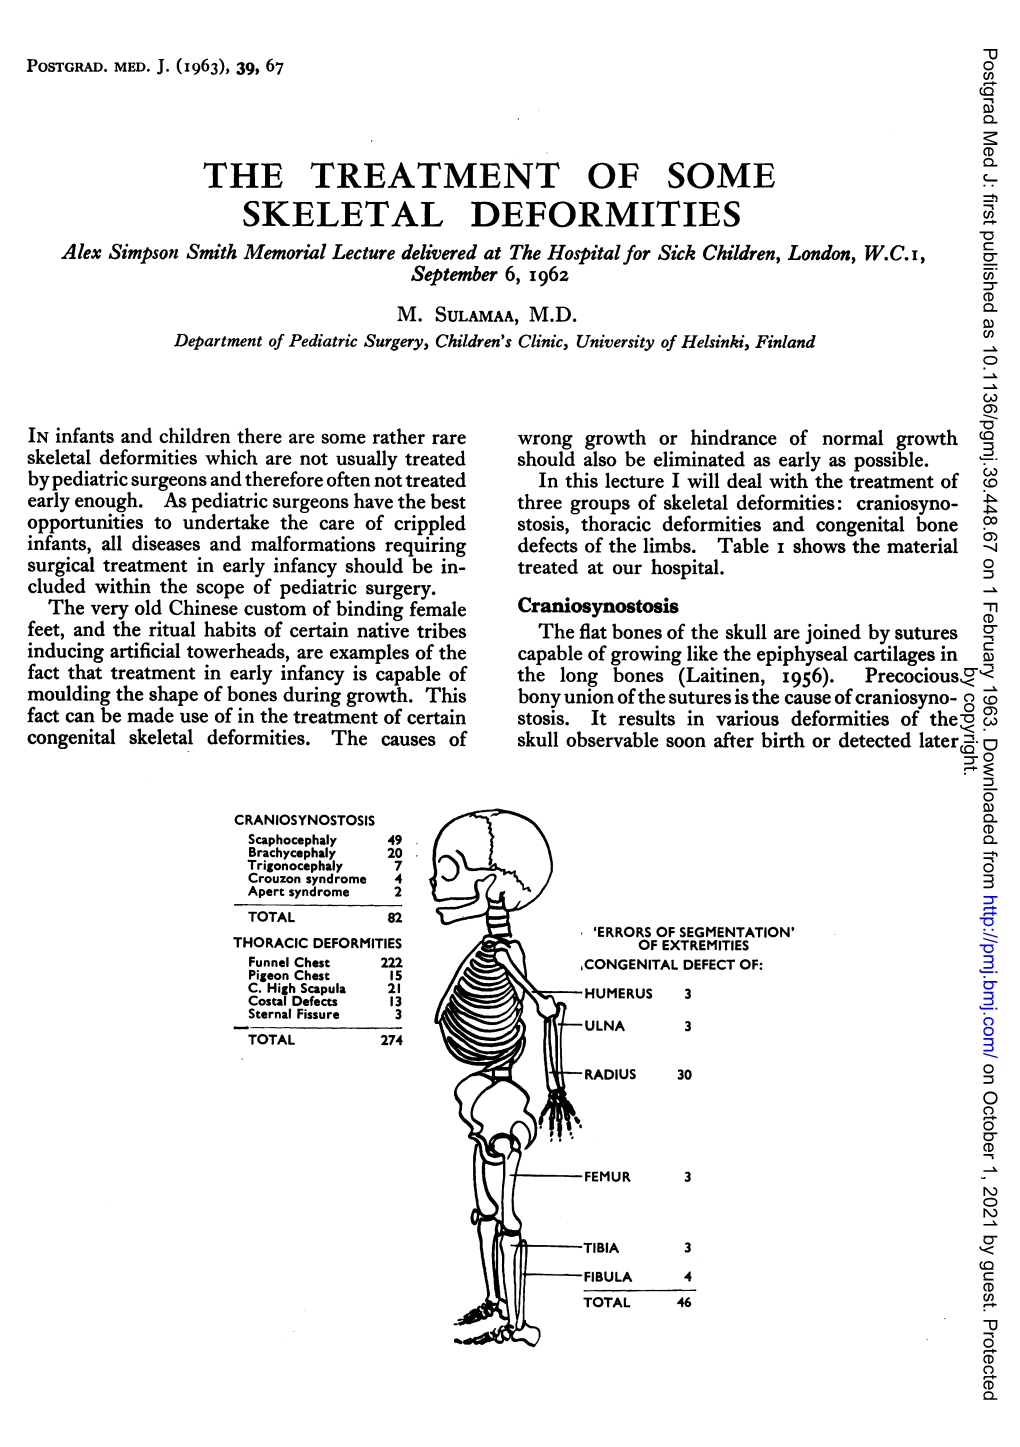 THE TREATMENT of SOME SKELETAL DEFORMITIES Alex Simpson Smith Memorial Lecture Delivered at the Hospitalfor Sick Children, London, W.C.I, September 6, 1962 M